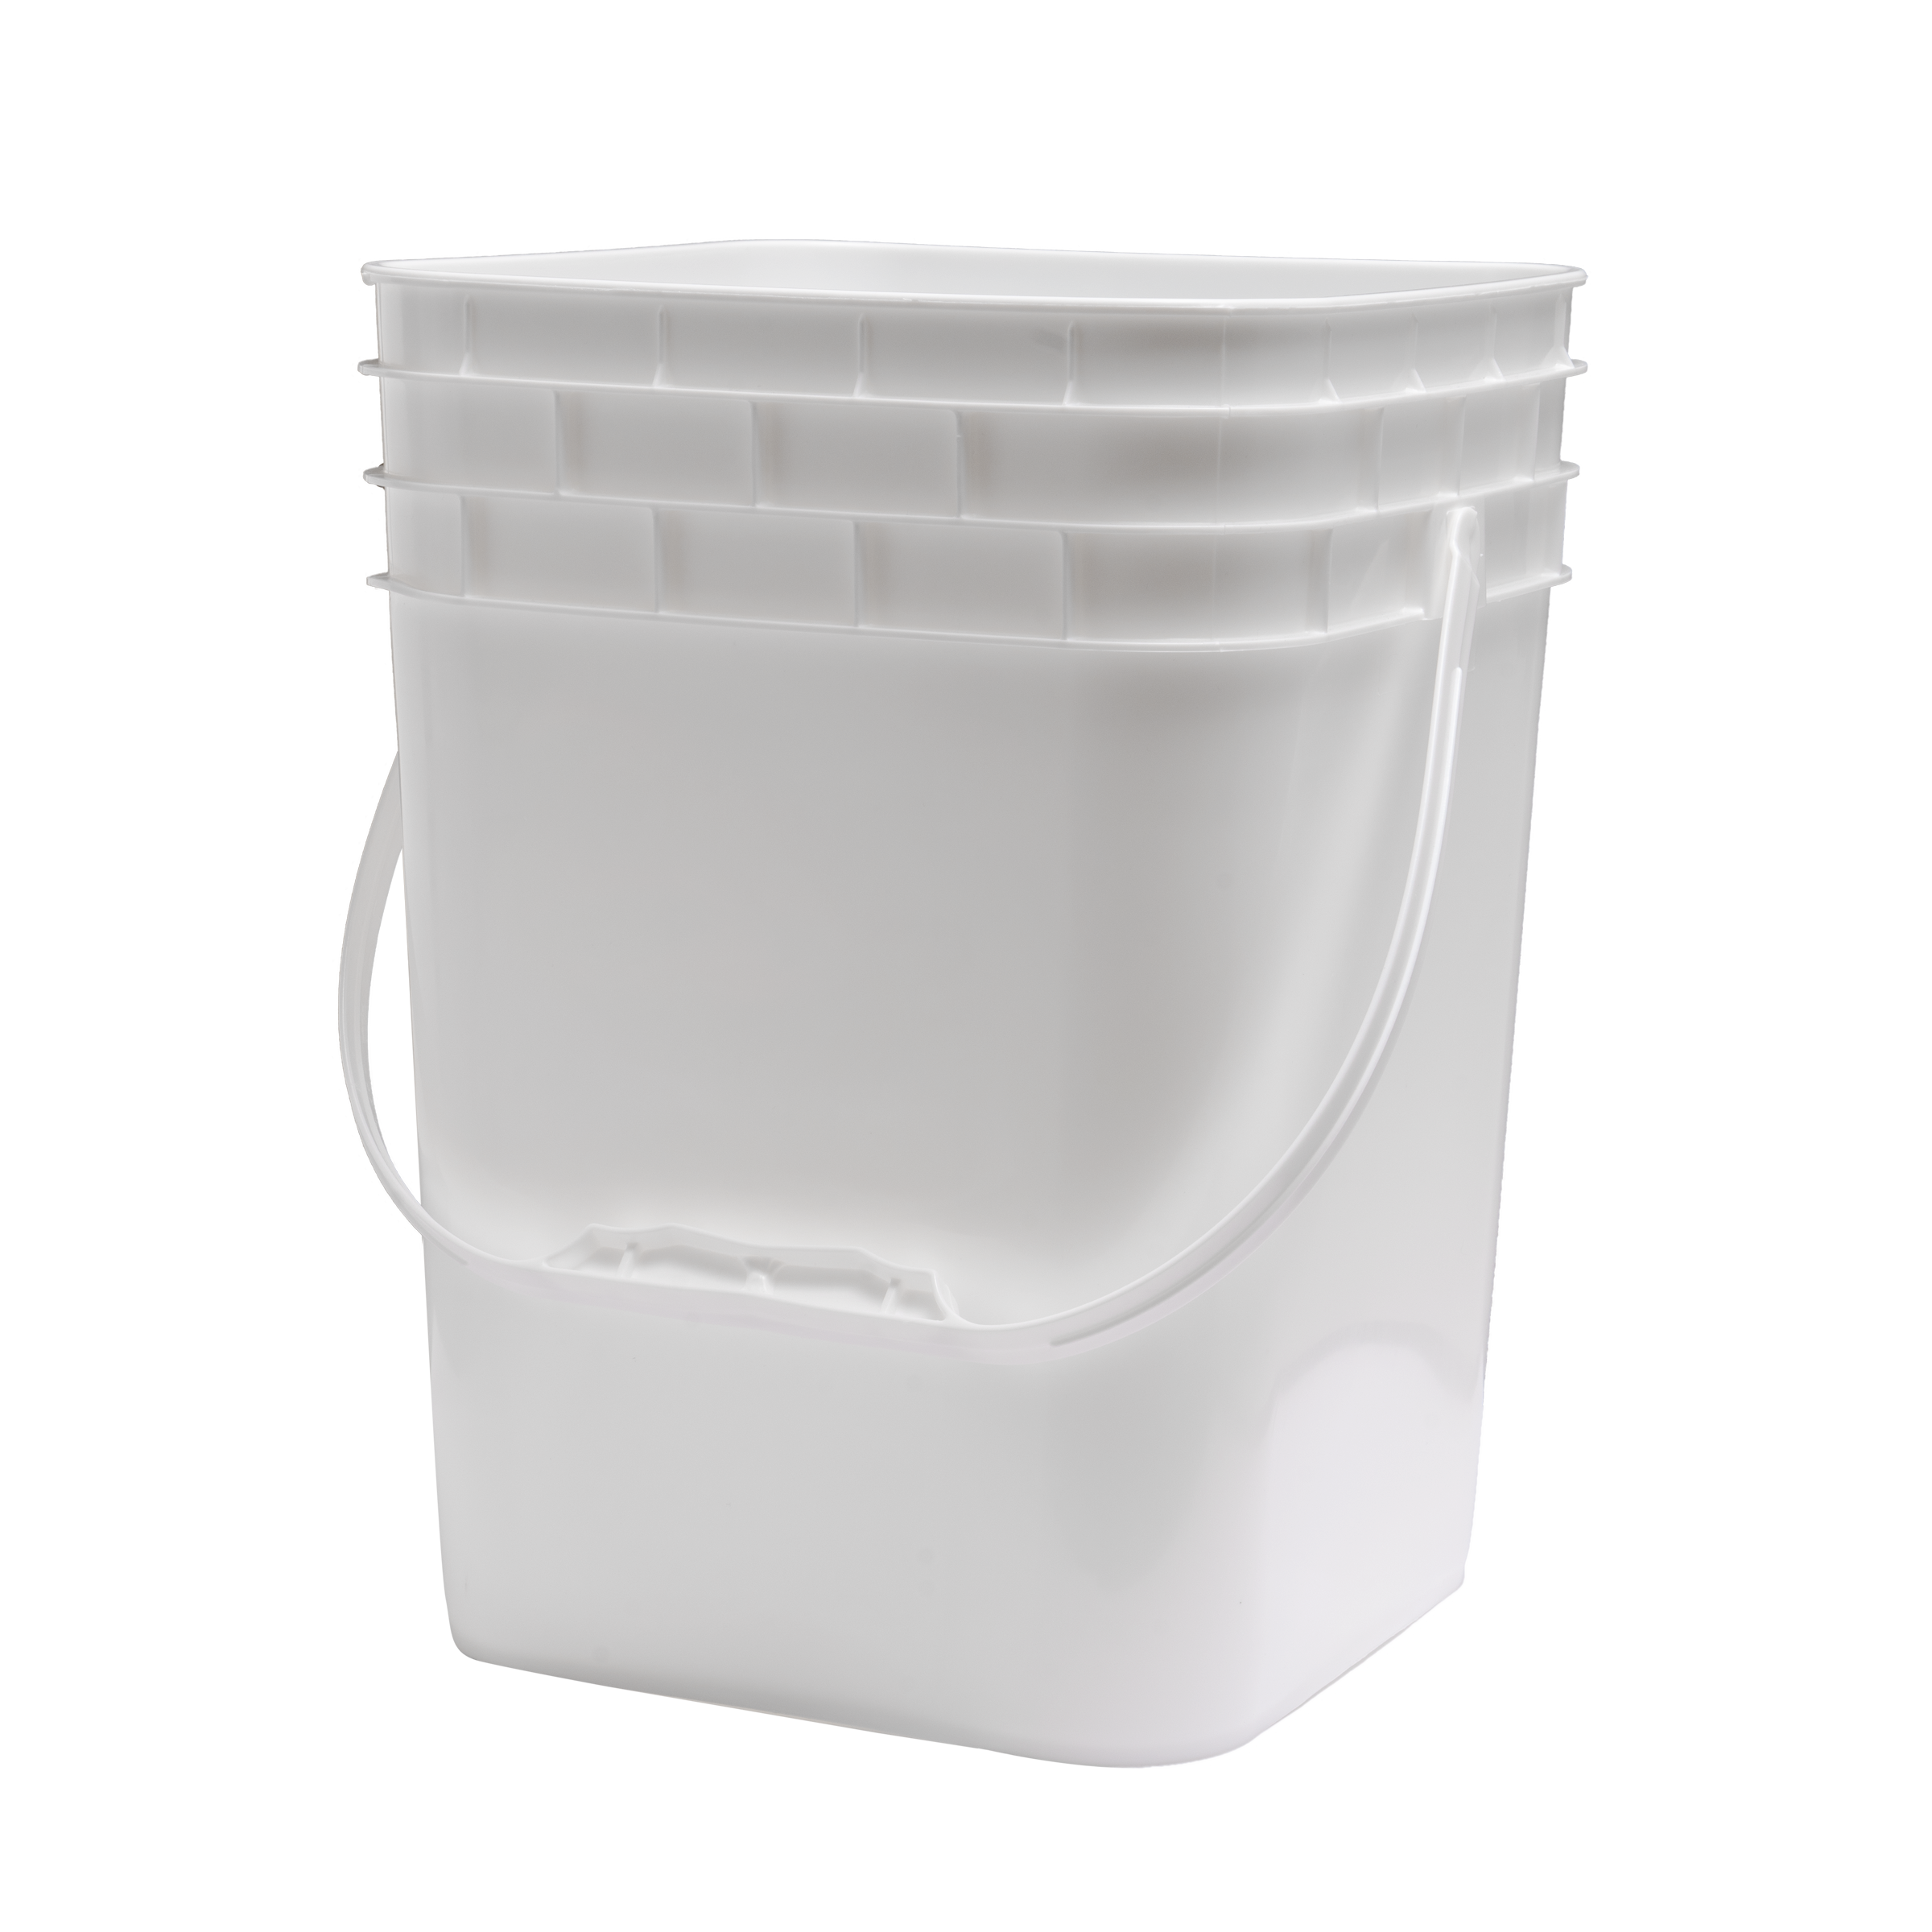 https://www.containersupplycompany.com/wp-content/uploads/2020/03/4-Gallon-Pail-Square-White-plastic-handle.png